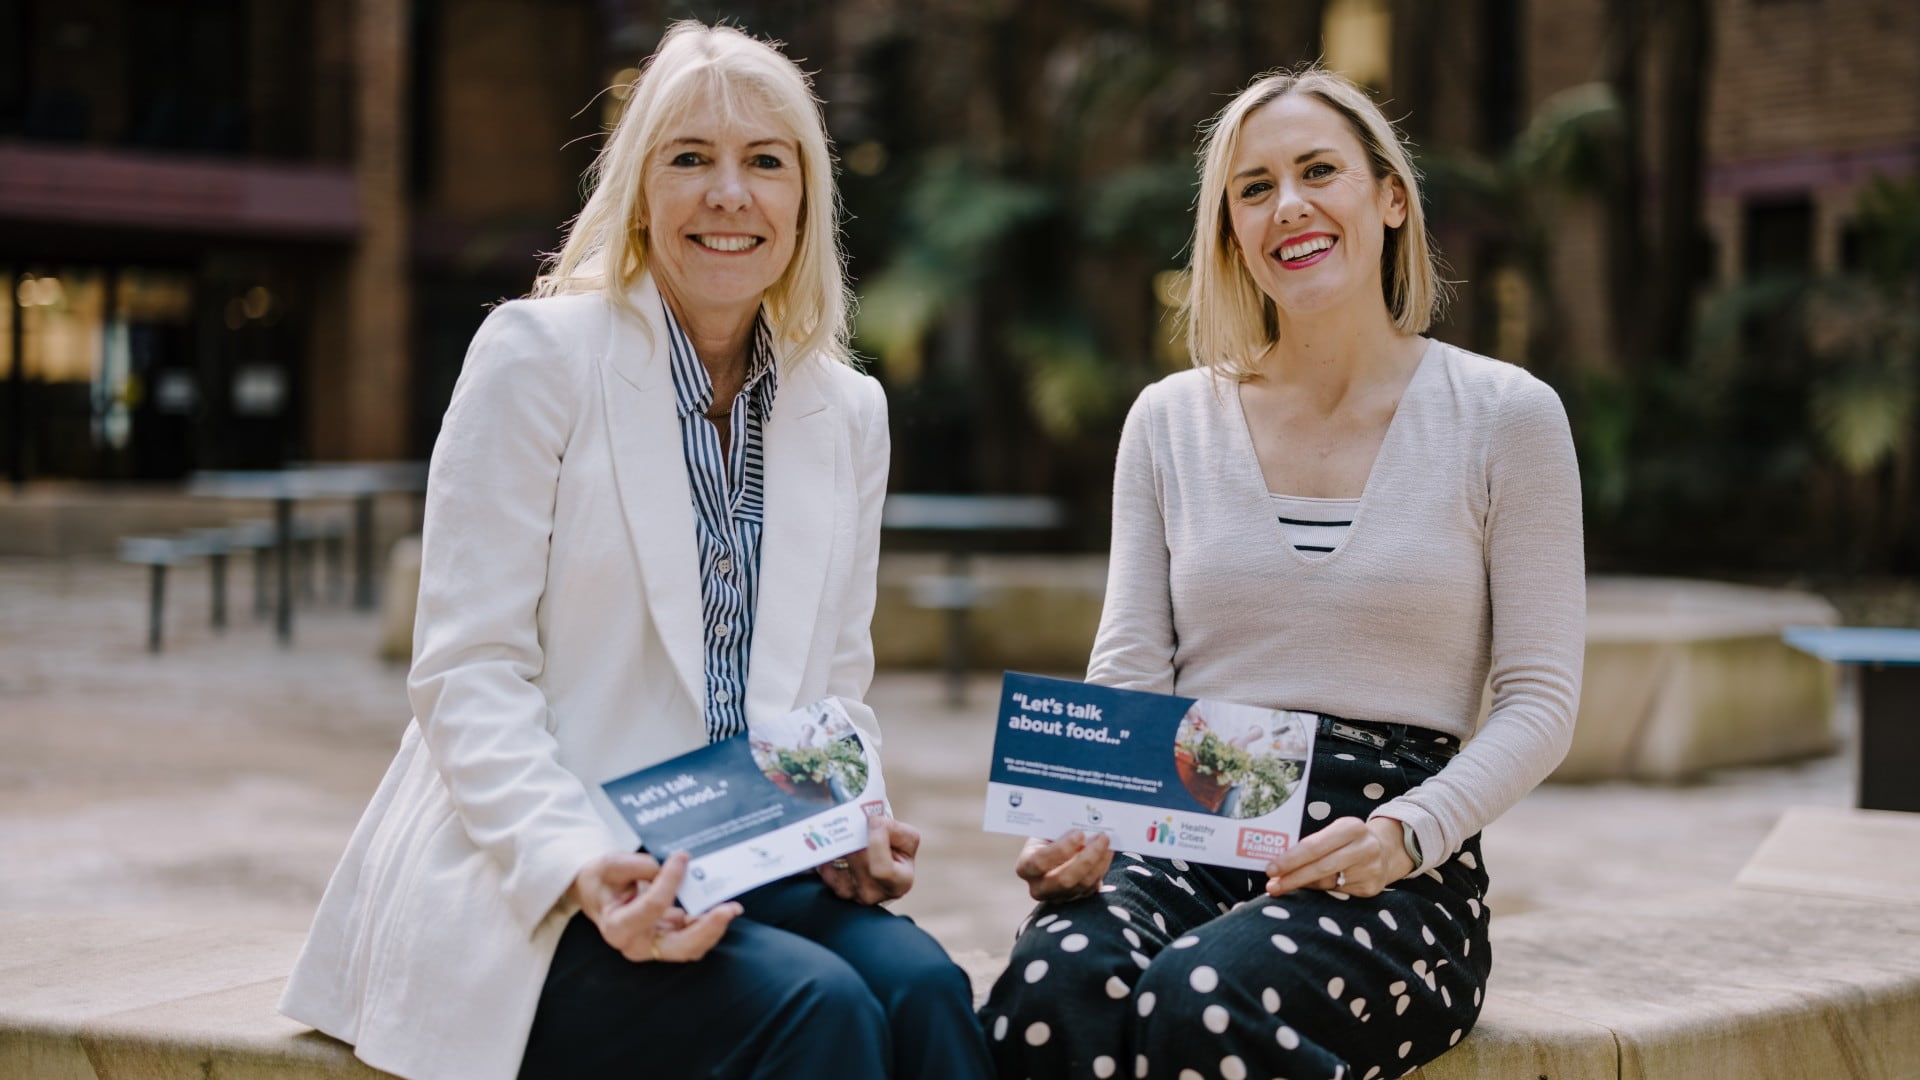 Karen Charlton and Katherine Kent holds the Illawarra Shoalhaven food survey flyer and sit next to each other on a bench. Photo: Michael Gray